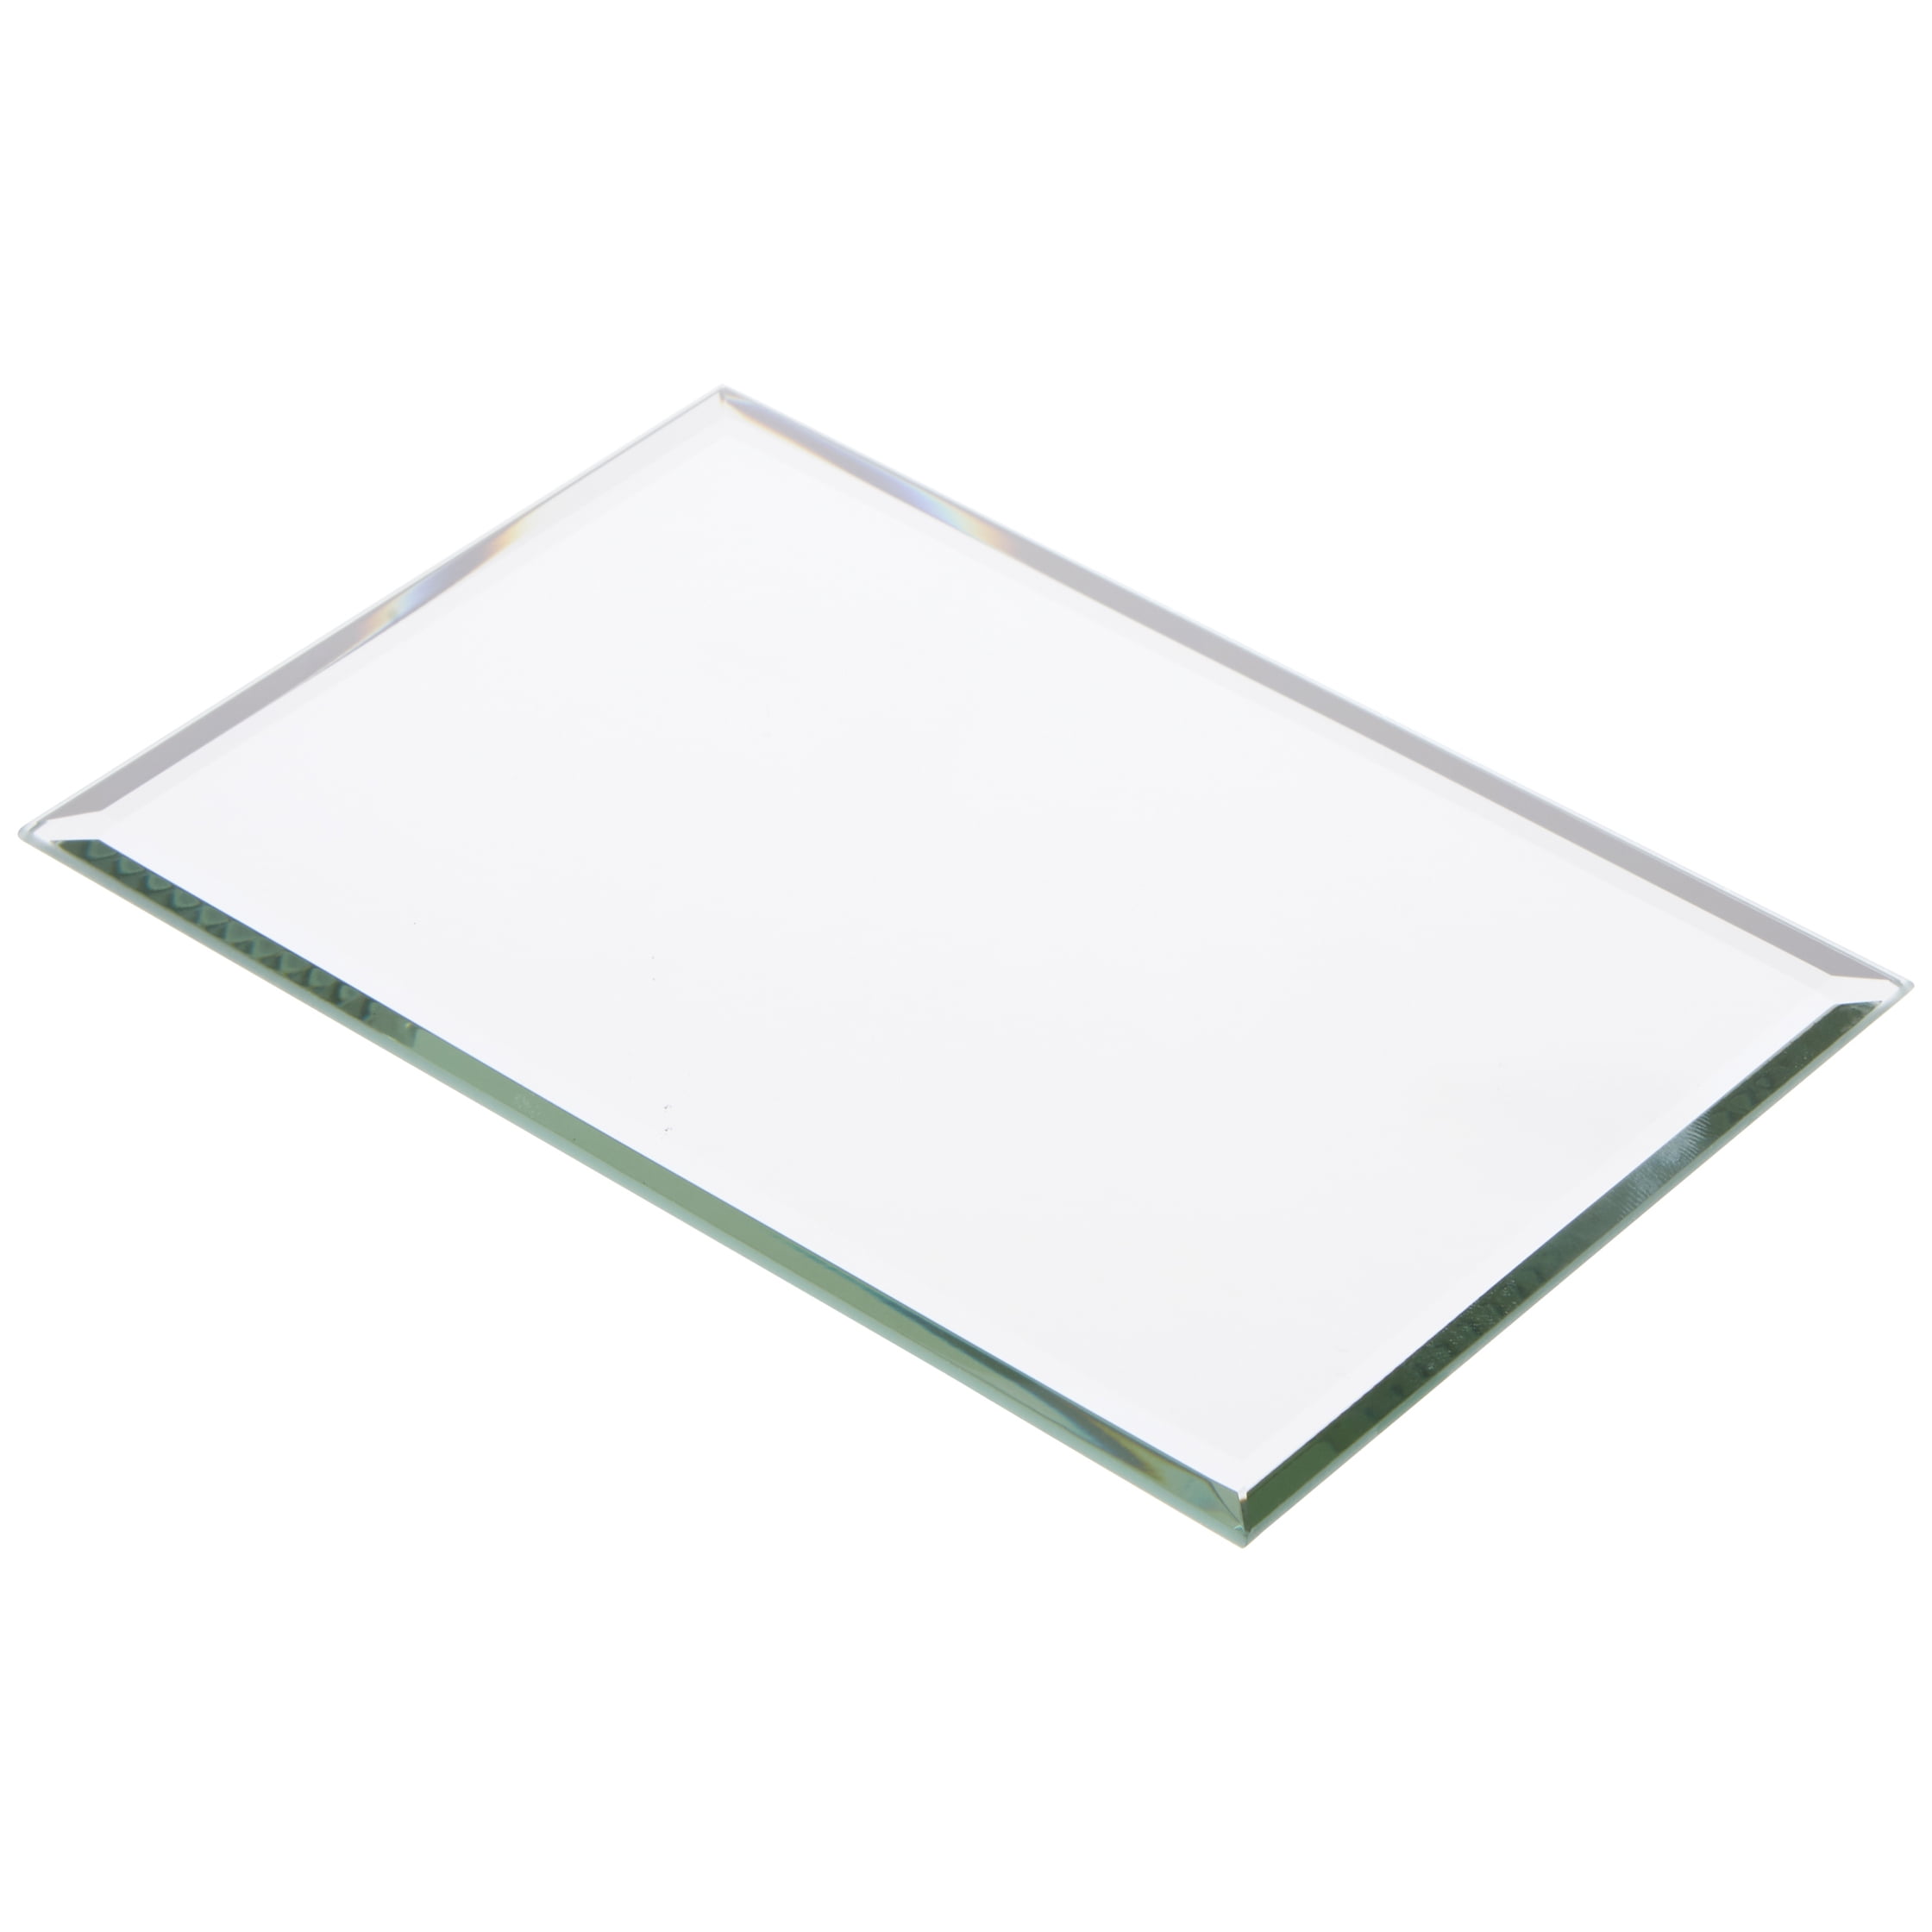 Plymor Square 5mm Beveled Glass Mirror 14 inch x 14 inch 